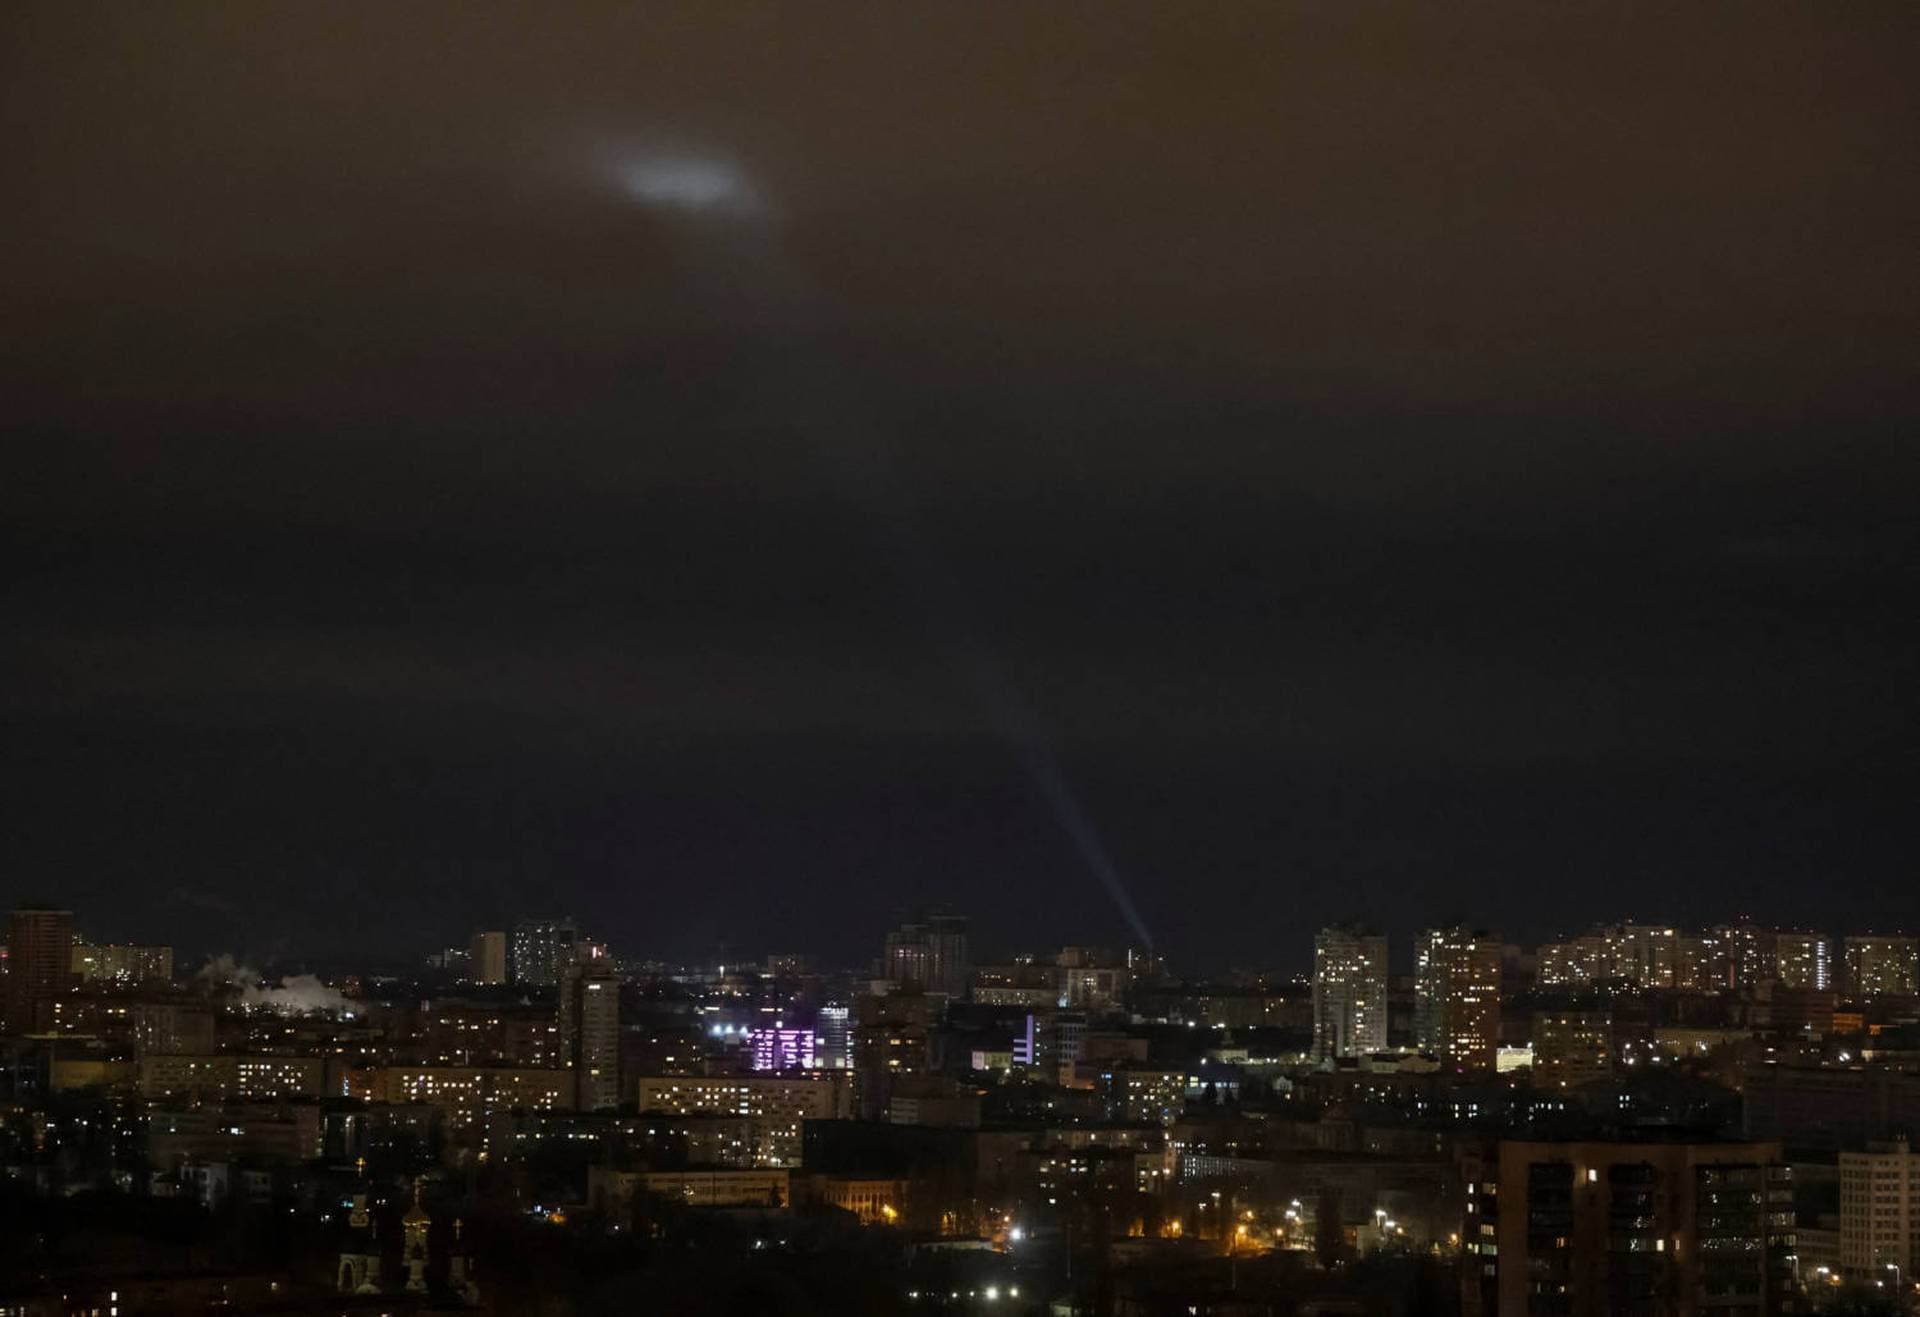 Ukrainian servicemen use a searchlight as they search for drones in the sky over the city during a Russian drone strike in Kyiv